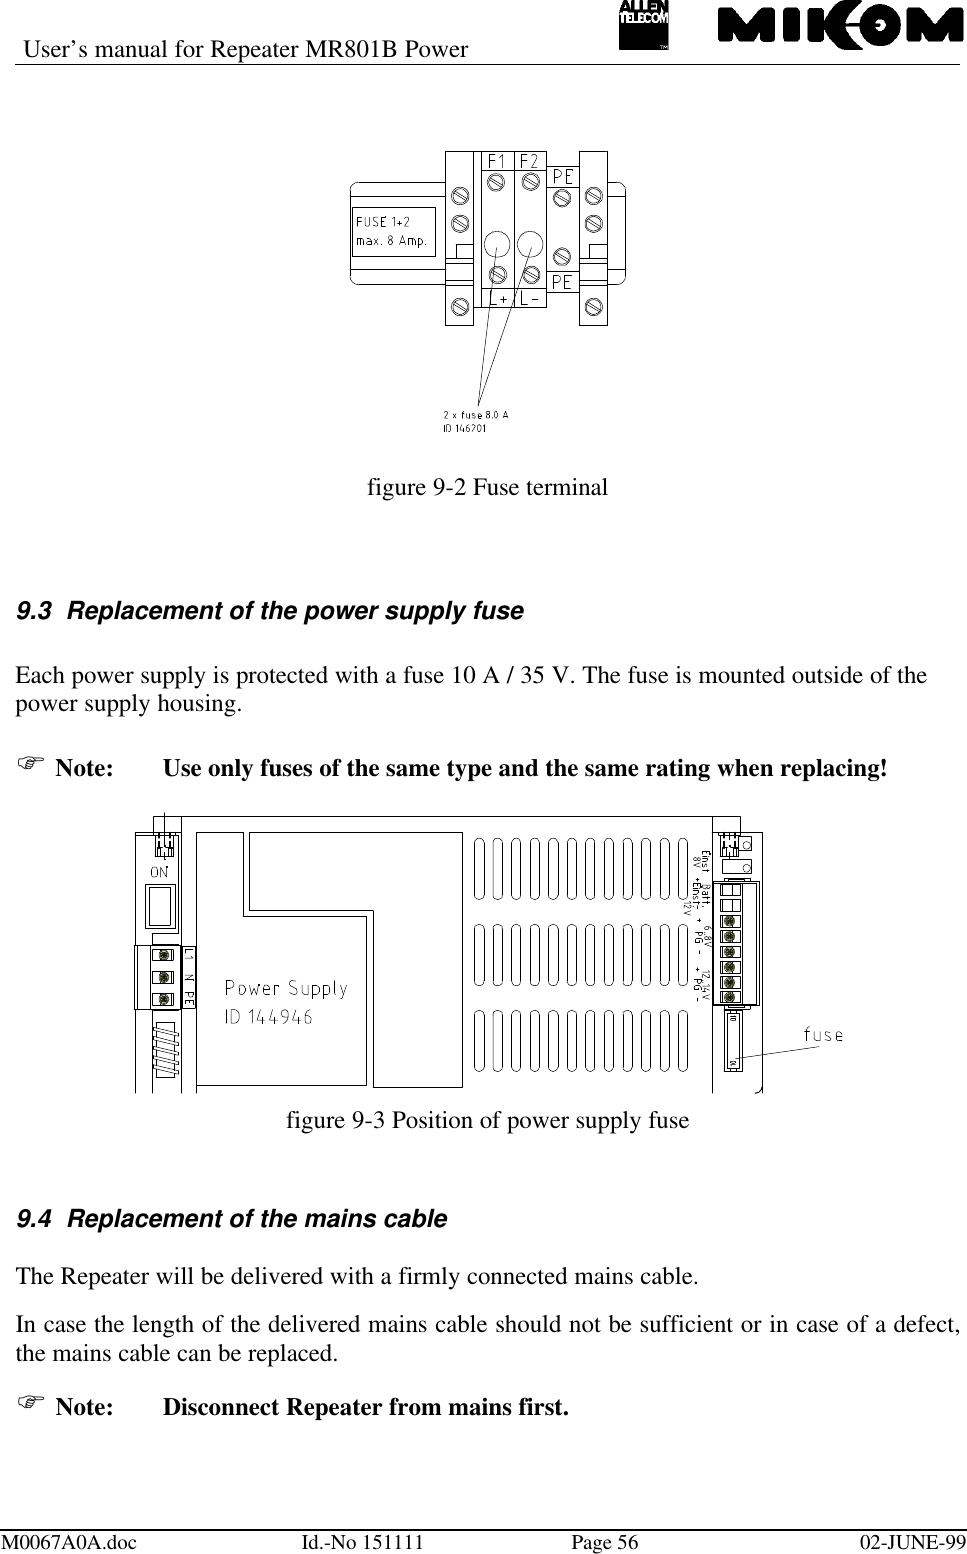 User’s manual for Repeater MR801B PowerM0067A0A.doc Id.-No 151111 Page 56 02-JUNE-99figure 9-2 Fuse terminal9.3 Replacement of the power supply fuseEach power supply is protected with a fuse 10 A / 35 V. The fuse is mounted outside of thepower supply housing.F Note:  Use only fuses of the same type and the same rating when replacing!figure 9-3 Position of power supply fuse9.4 Replacement of the mains cableThe Repeater will be delivered with a firmly connected mains cable.In case the length of the delivered mains cable should not be sufficient or in case of a defect,the mains cable can be replaced.F Note: Disconnect Repeater from mains first.